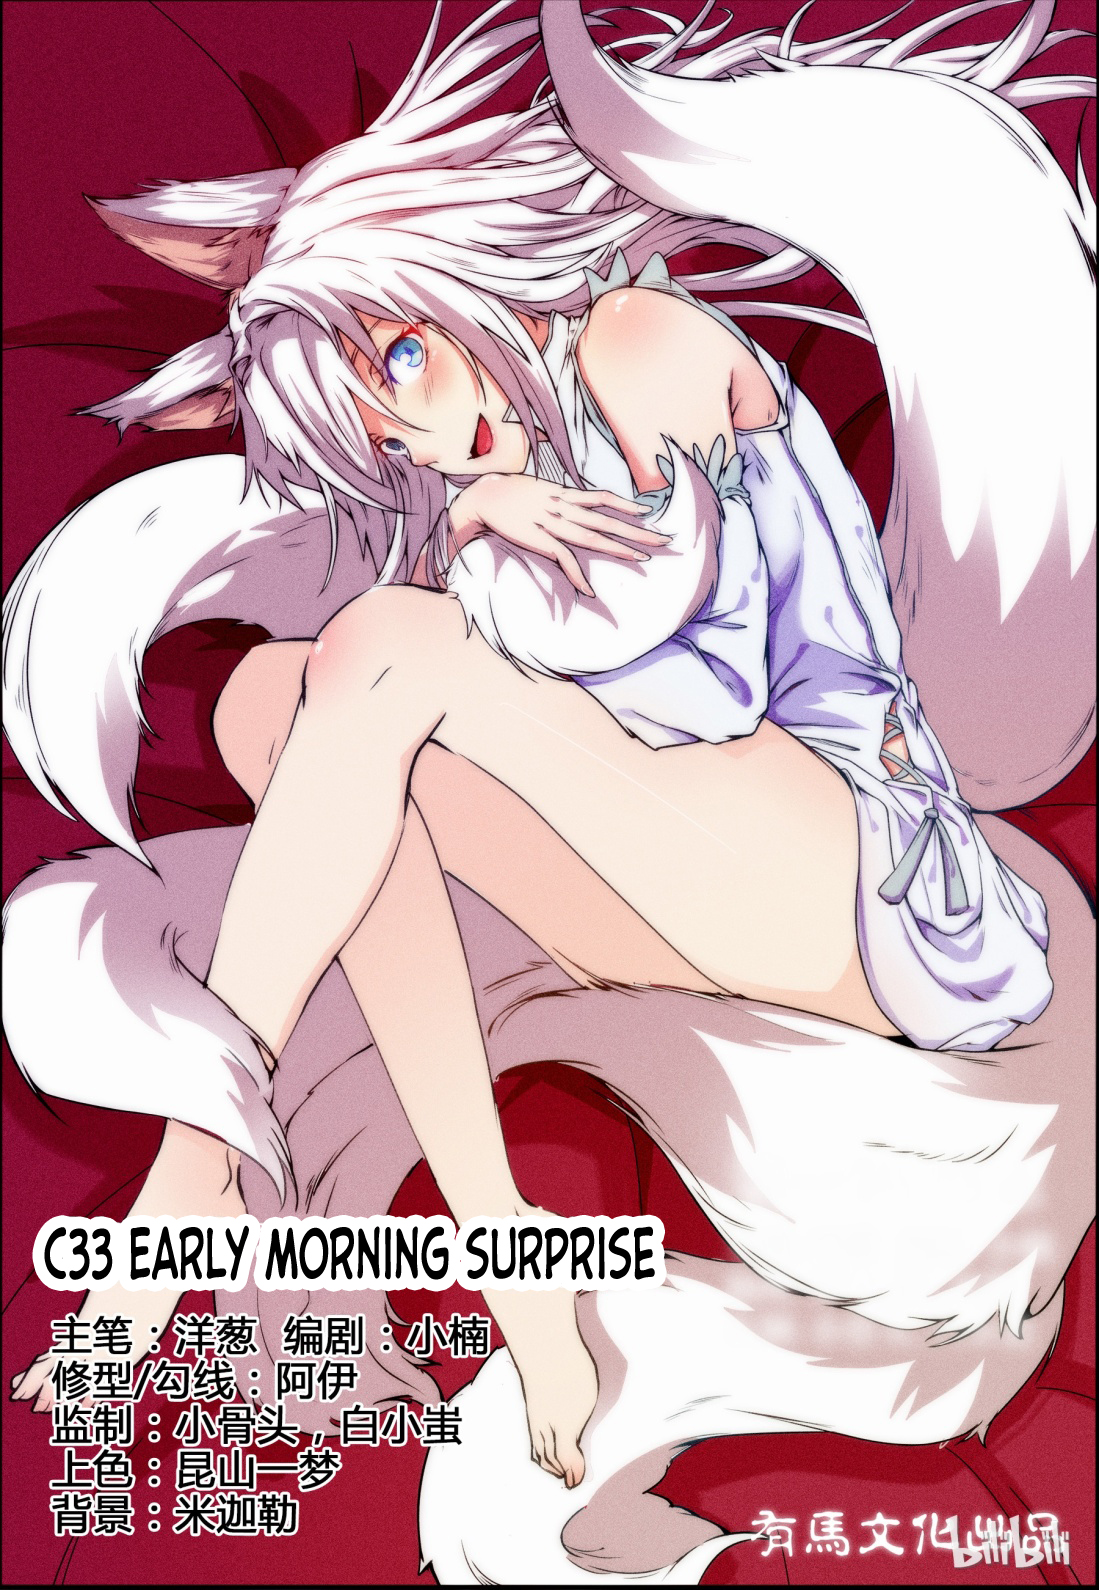 My Wife Is A Fox Spirit Ch. 33 Early Morning Surprise